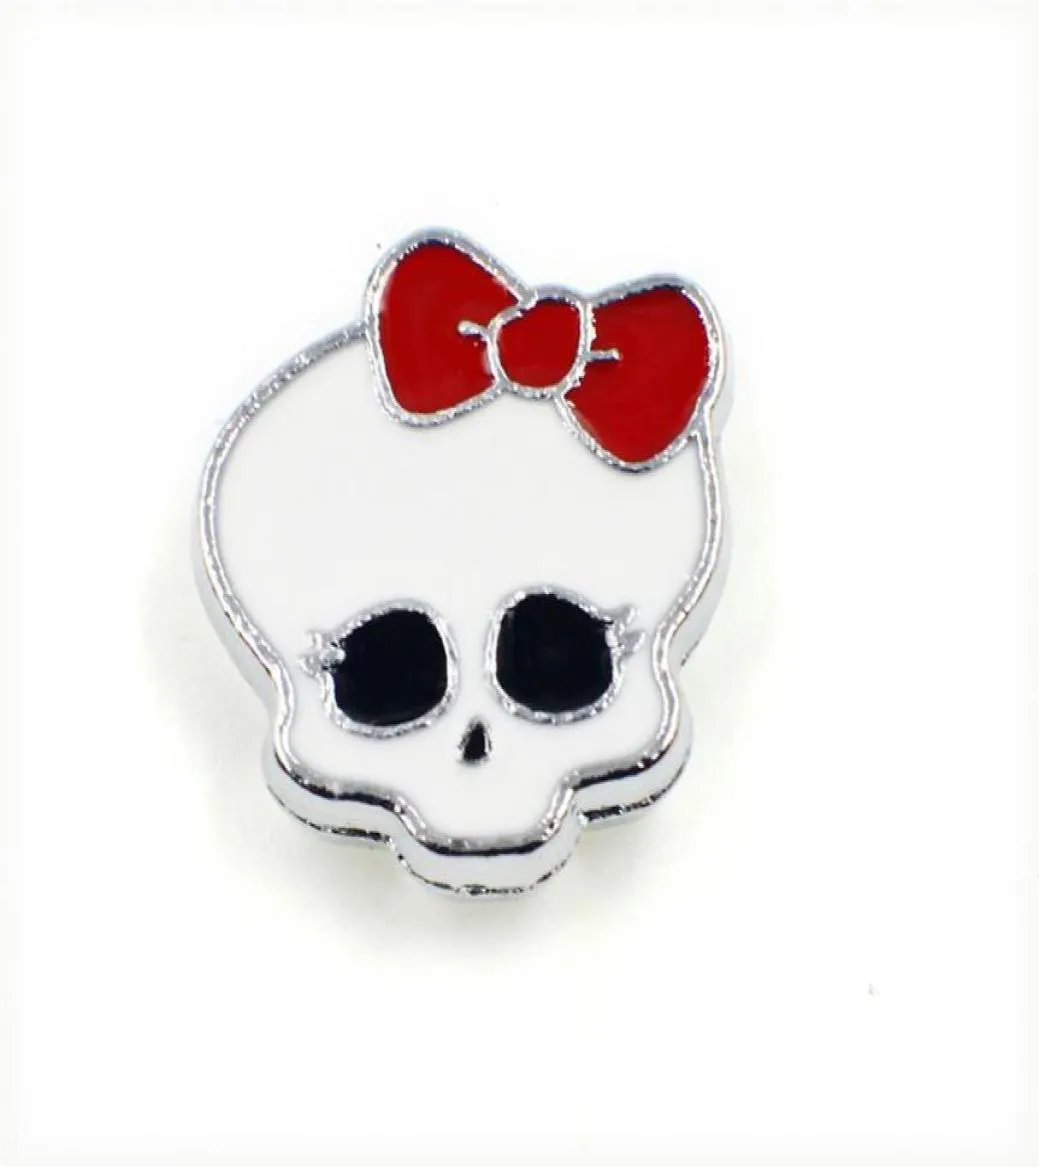 Hela 50st Zink Alloy Halloween Skull med Bow Tie 8mm Slide Charms Diy Accessories Fit 8mm Pet Collars Wristband SL1657323859